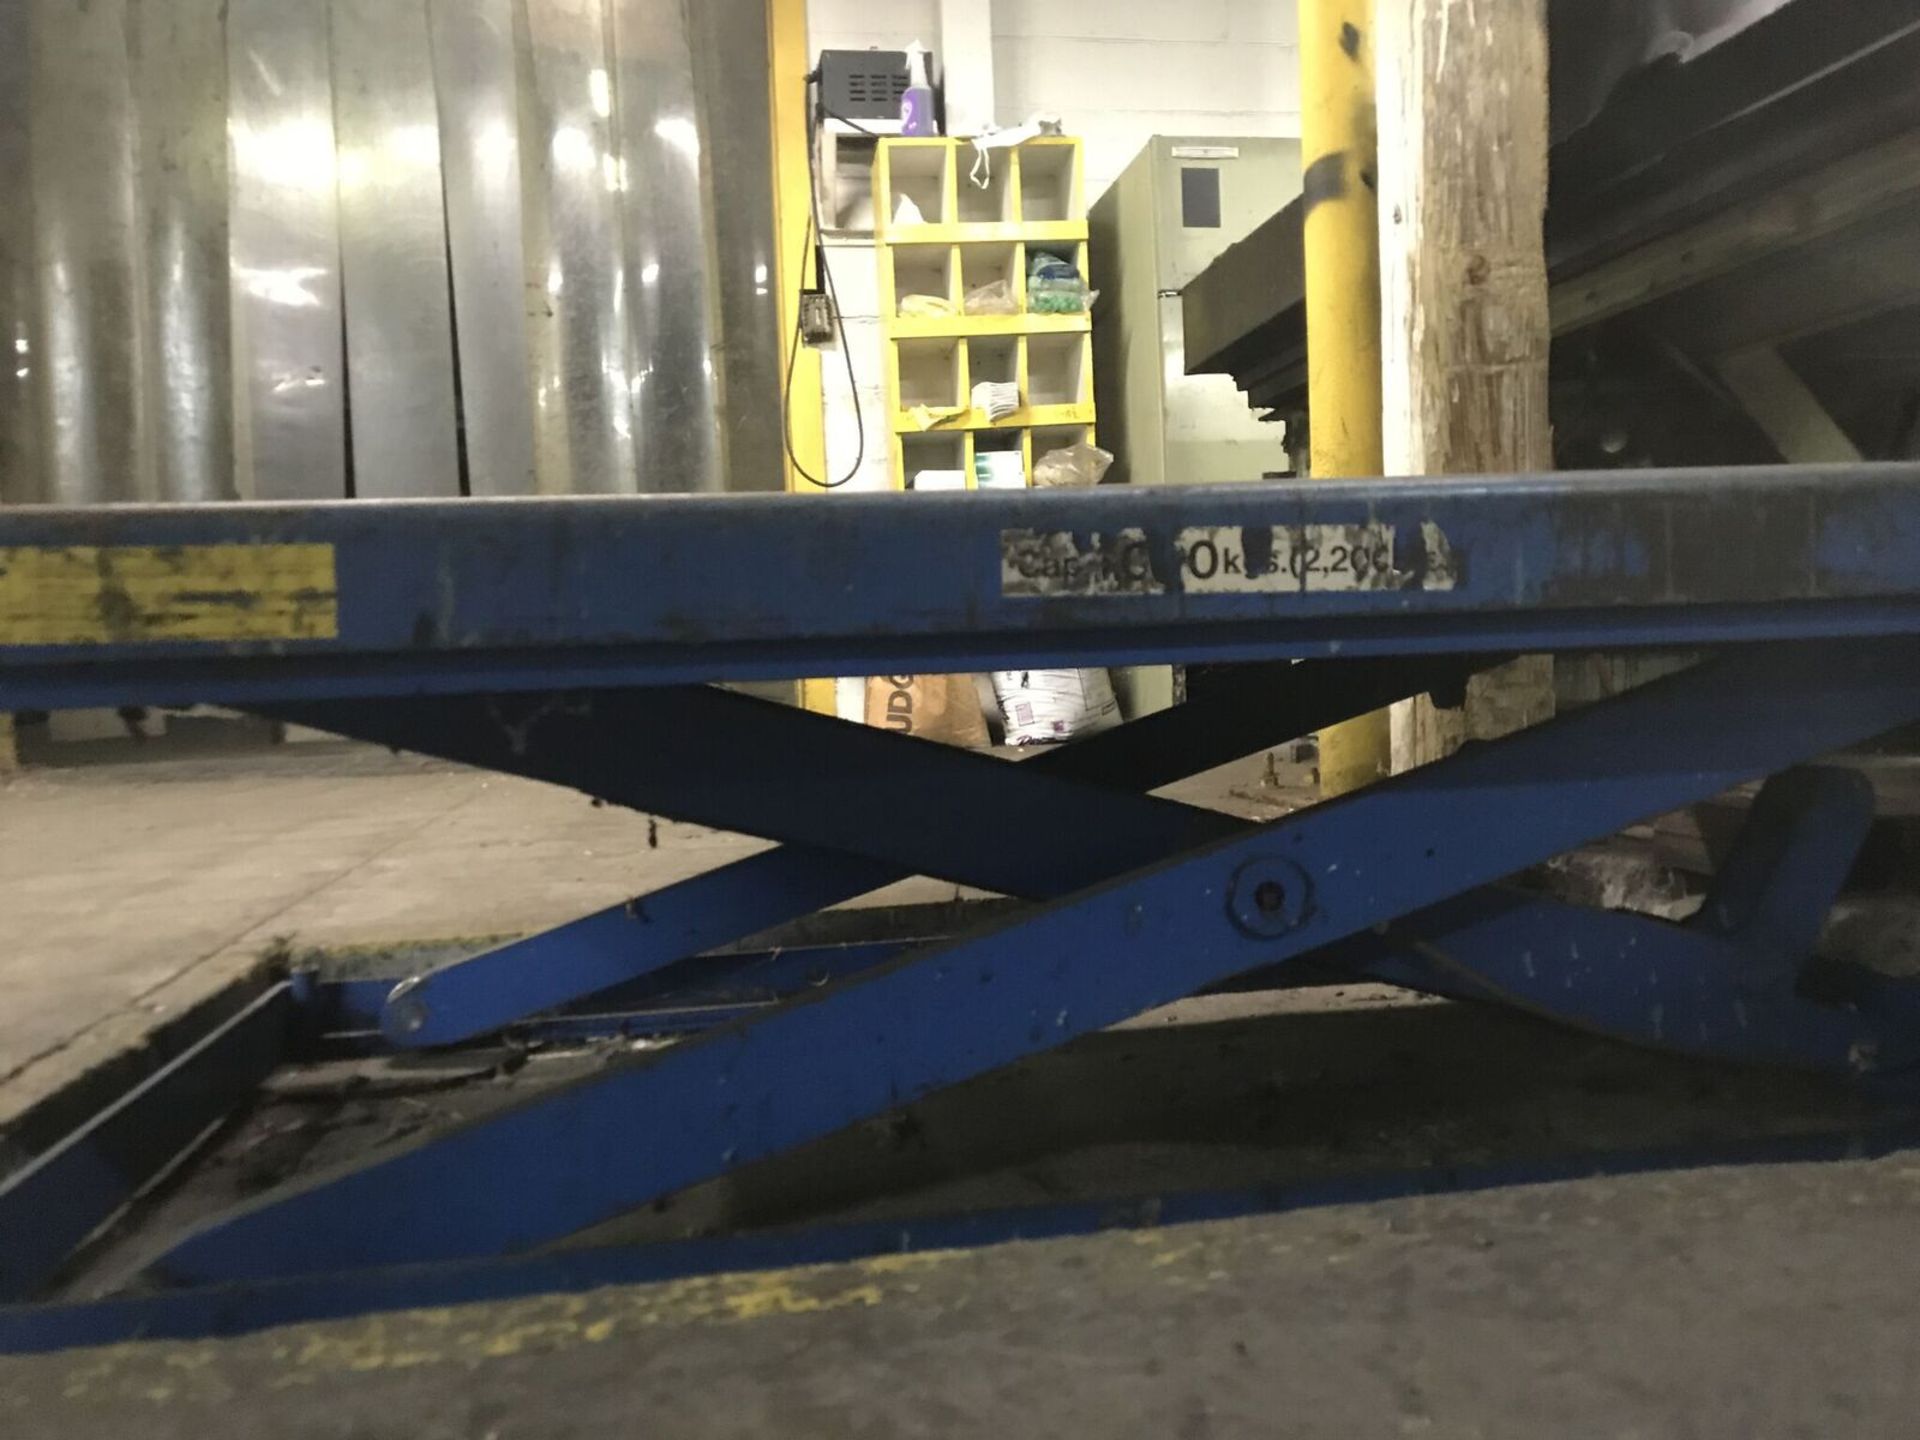 Scissor Lift, In Floor, Hydraulic over Electric, 4' x 3' with 3' Lift, 2,200 pound capacity - Image 2 of 2